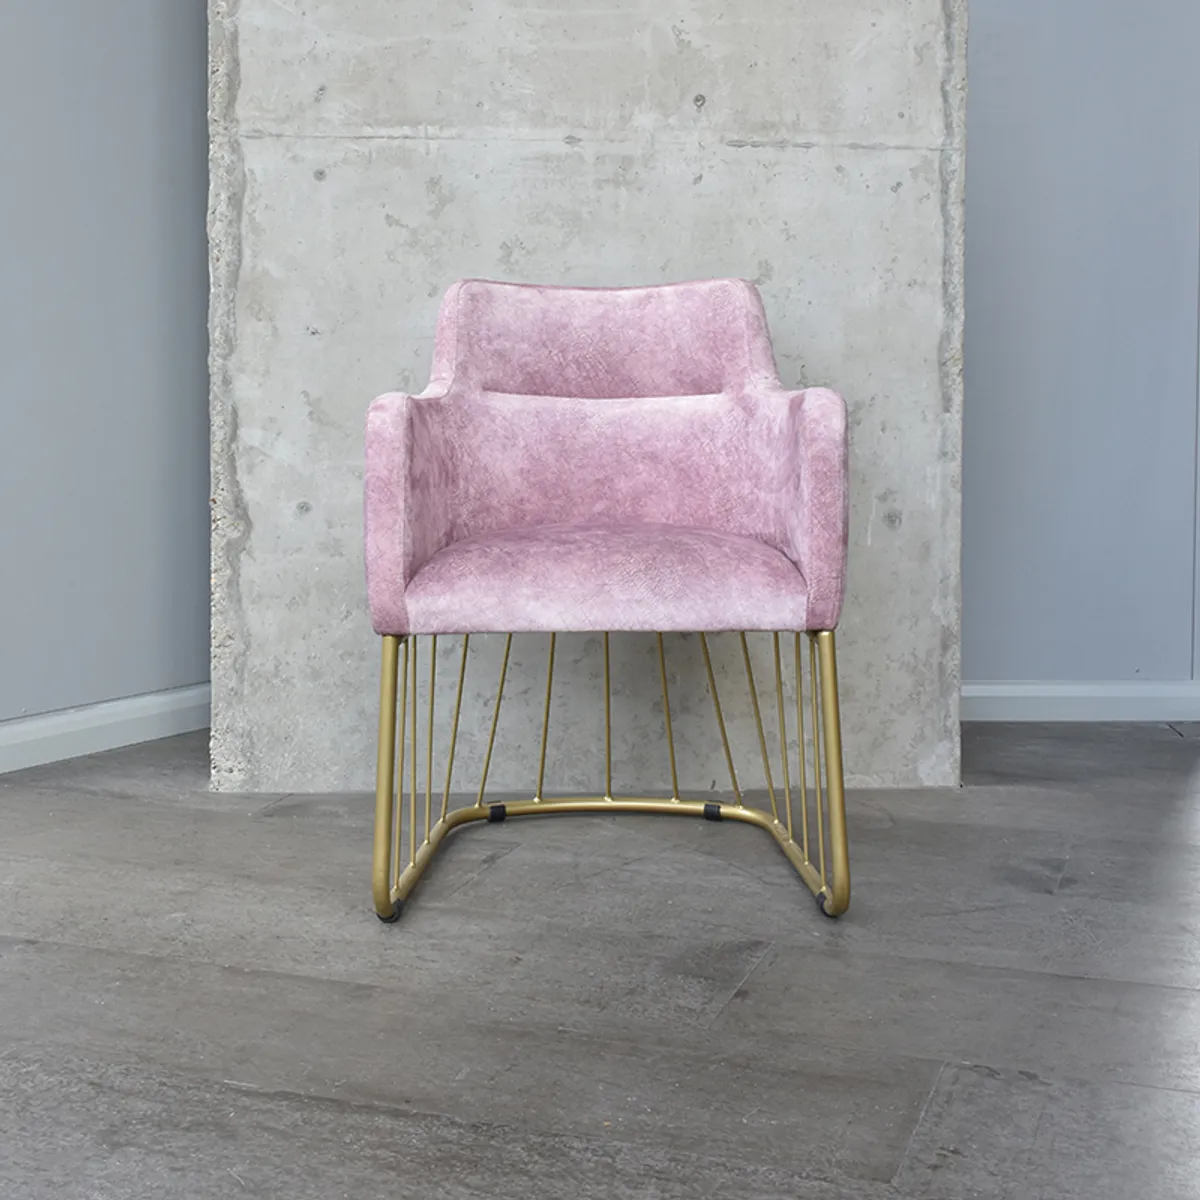 Luxy Armchair Showroom Sample Inside Out Contracts3